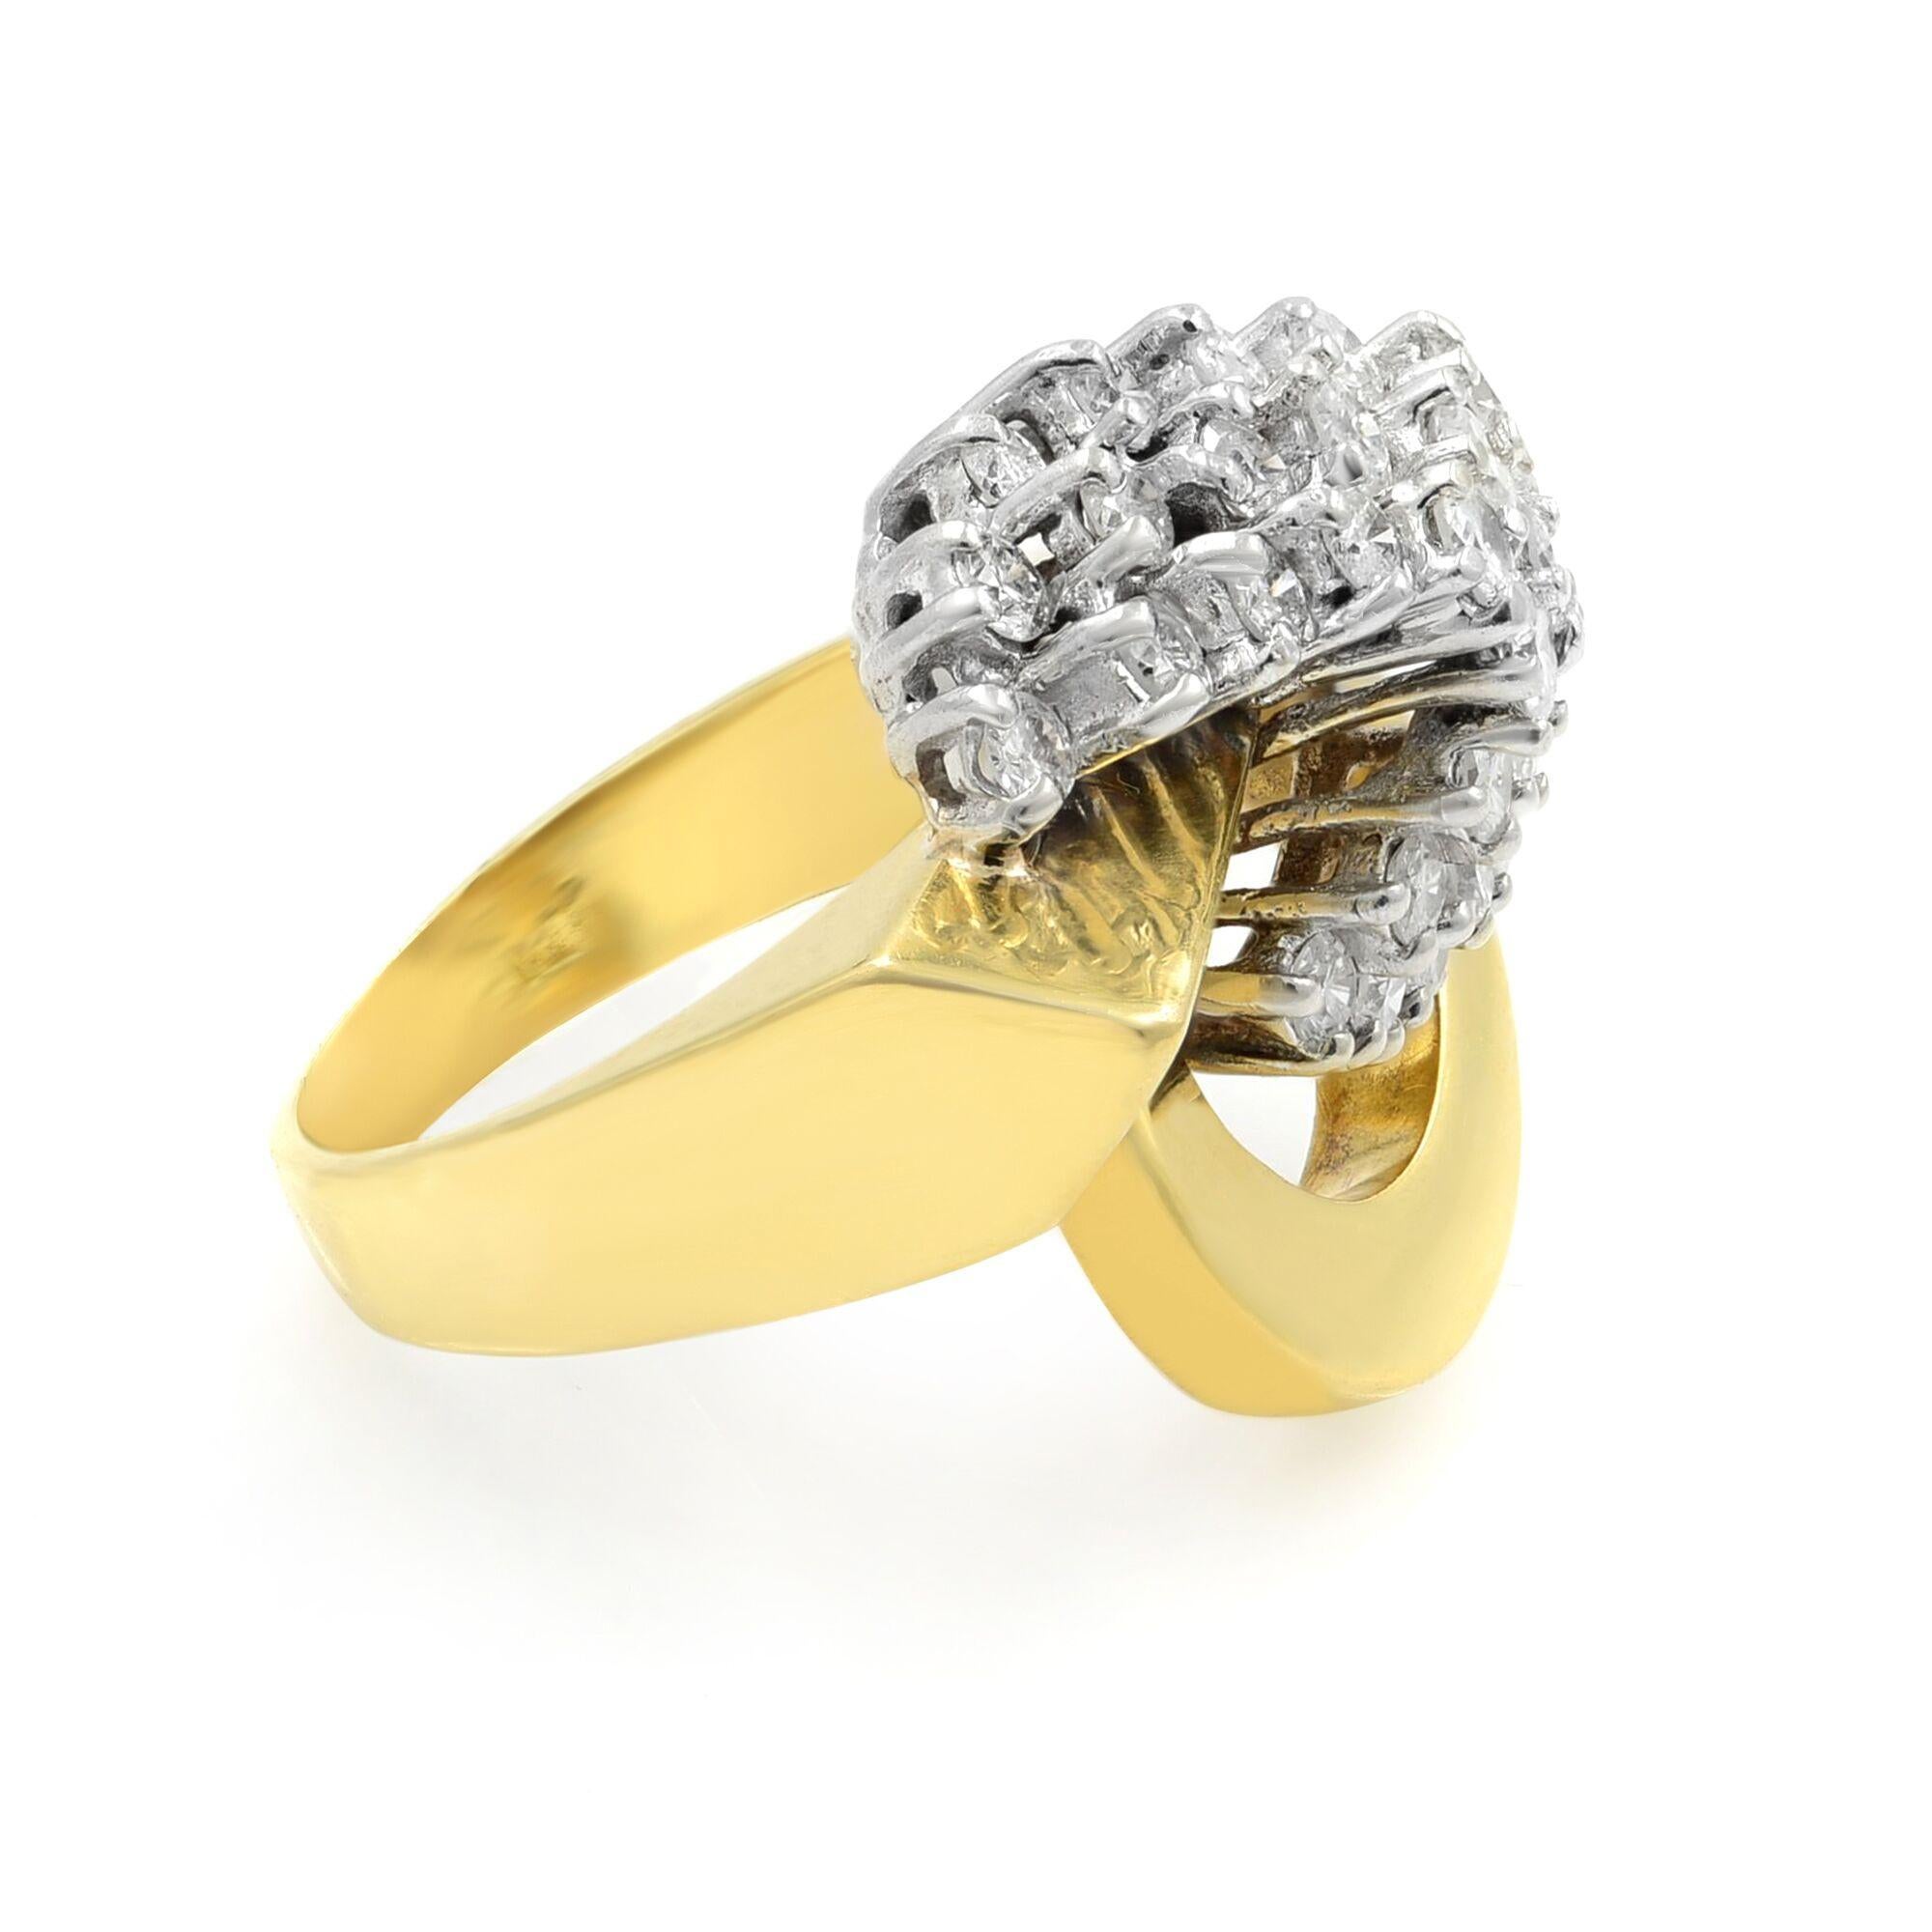 Vintage Round Cut Diamond Cocktail Ring 18K Yellow Gold 1.65Cttw For Sale 2